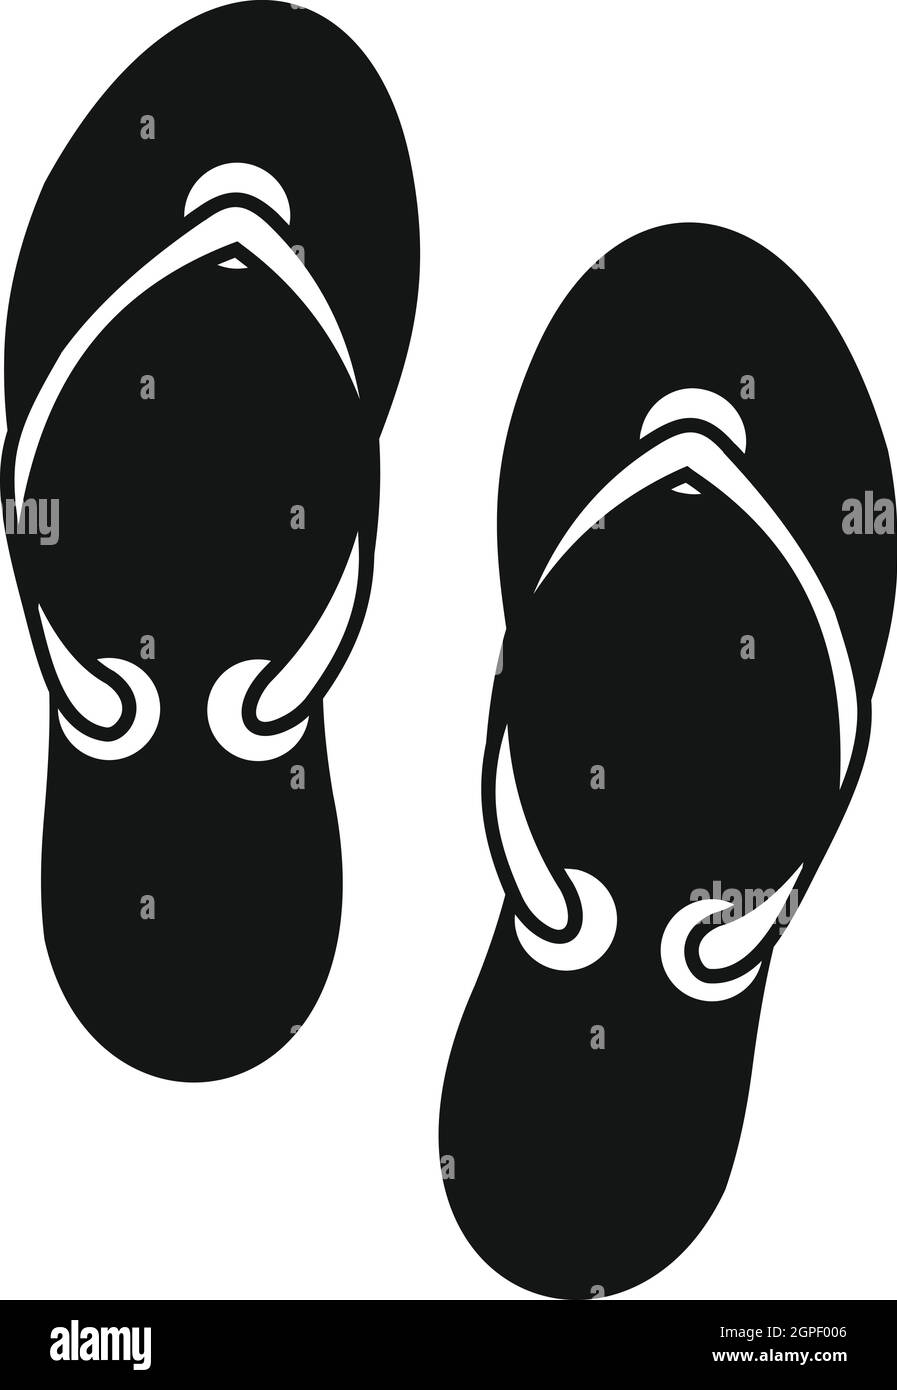 Sandals Black and White Stock Photos & Images - Alamy